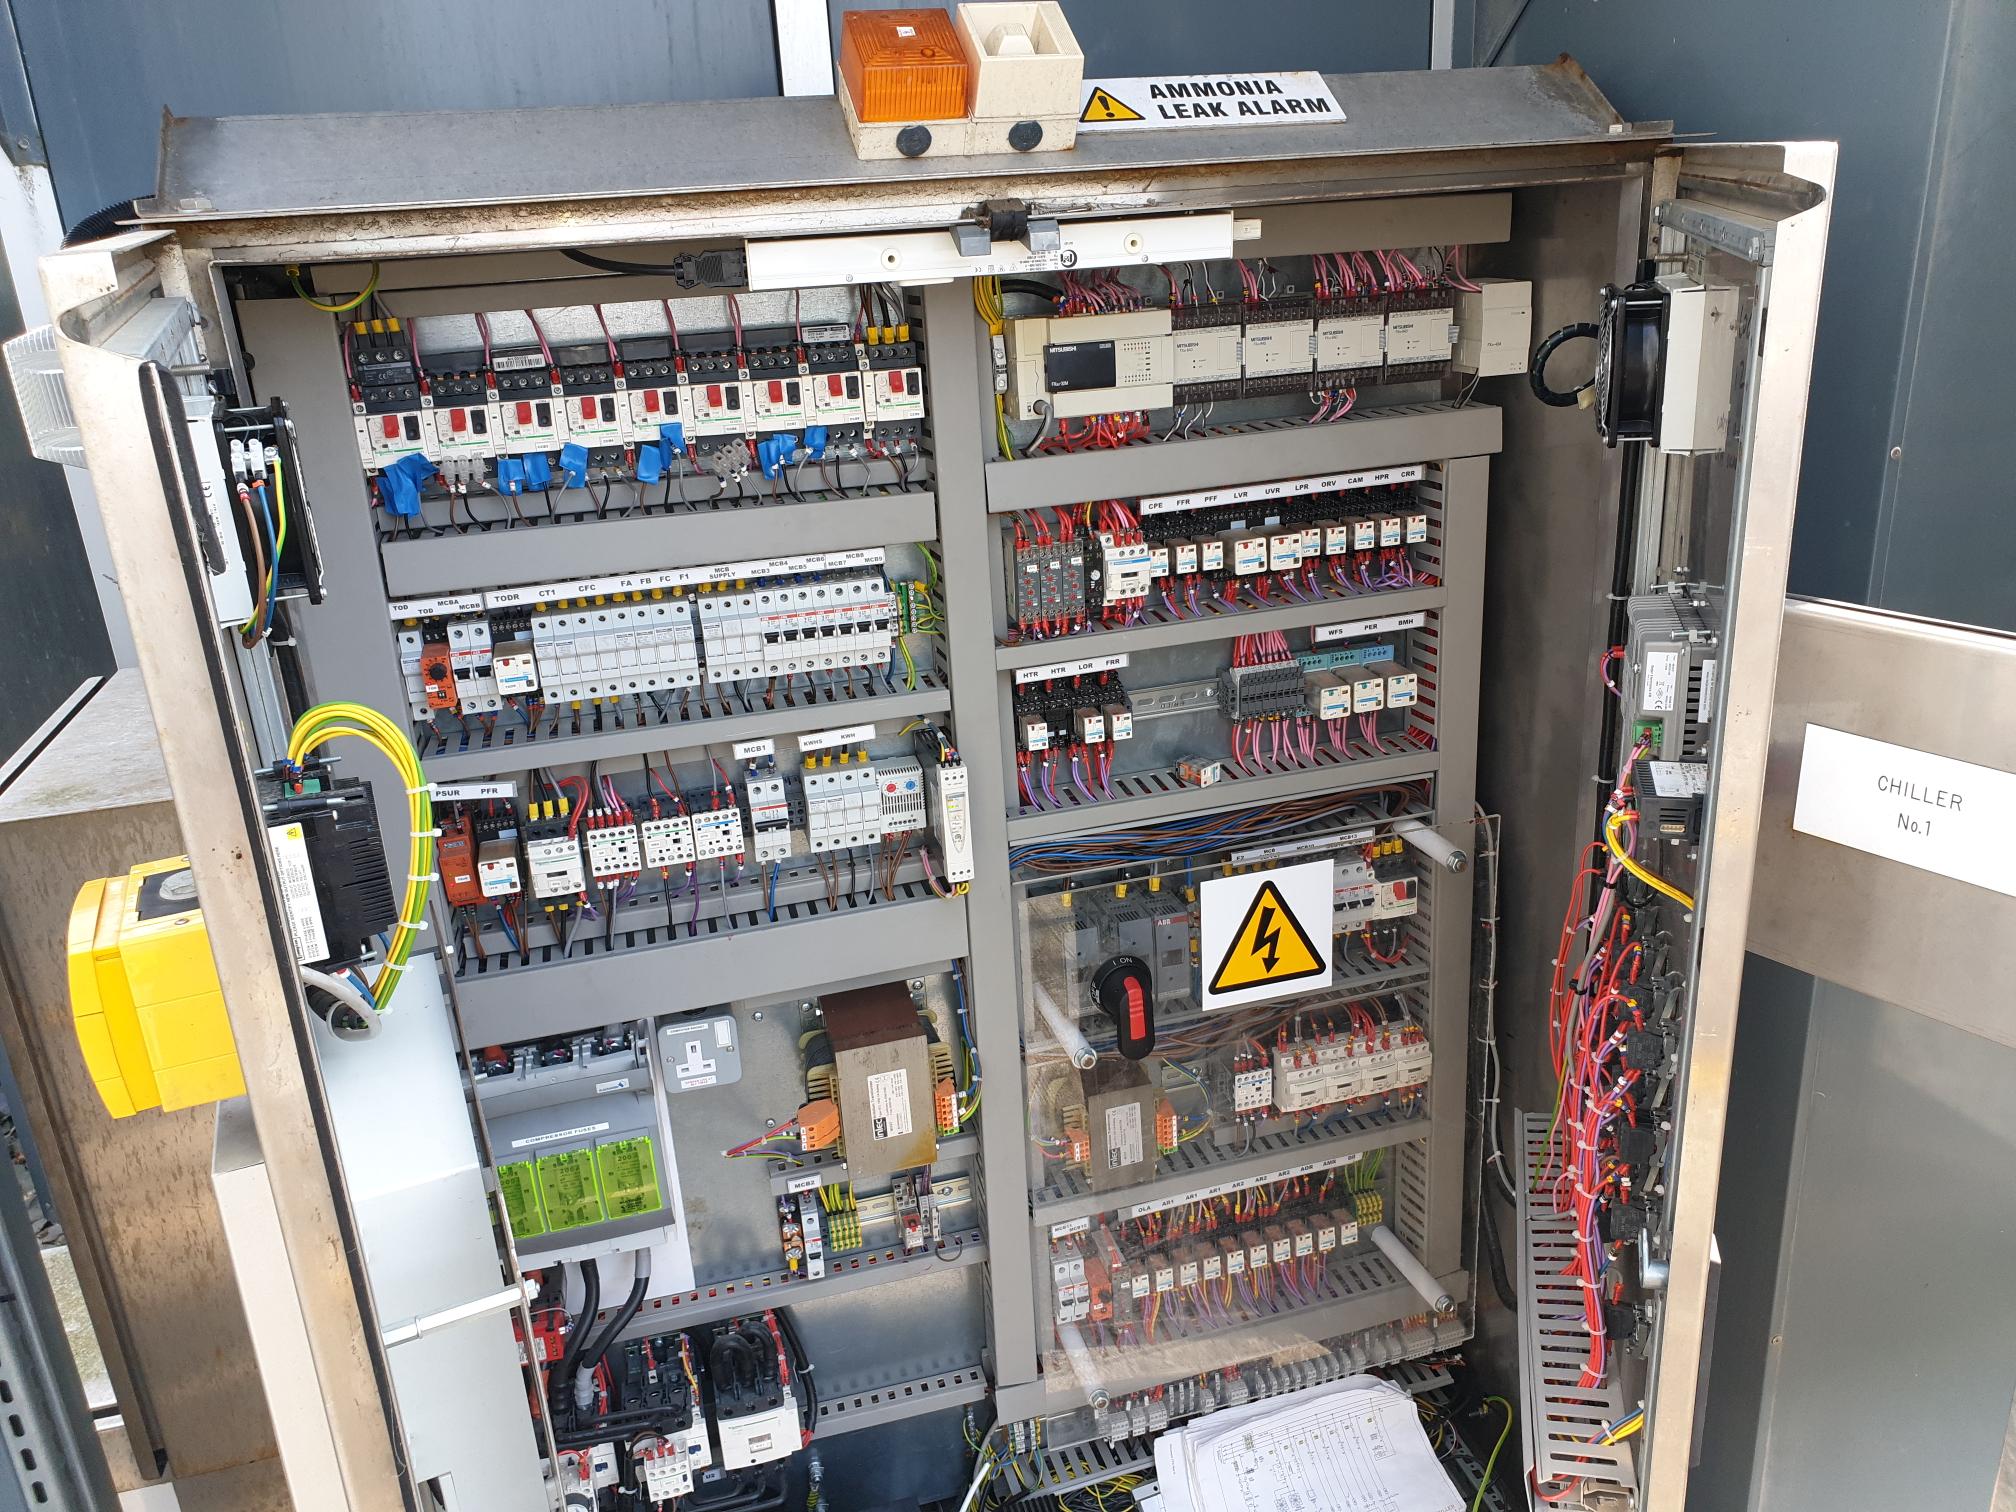 Open chiller controls panel showing PLC, relays, contactors and wiring